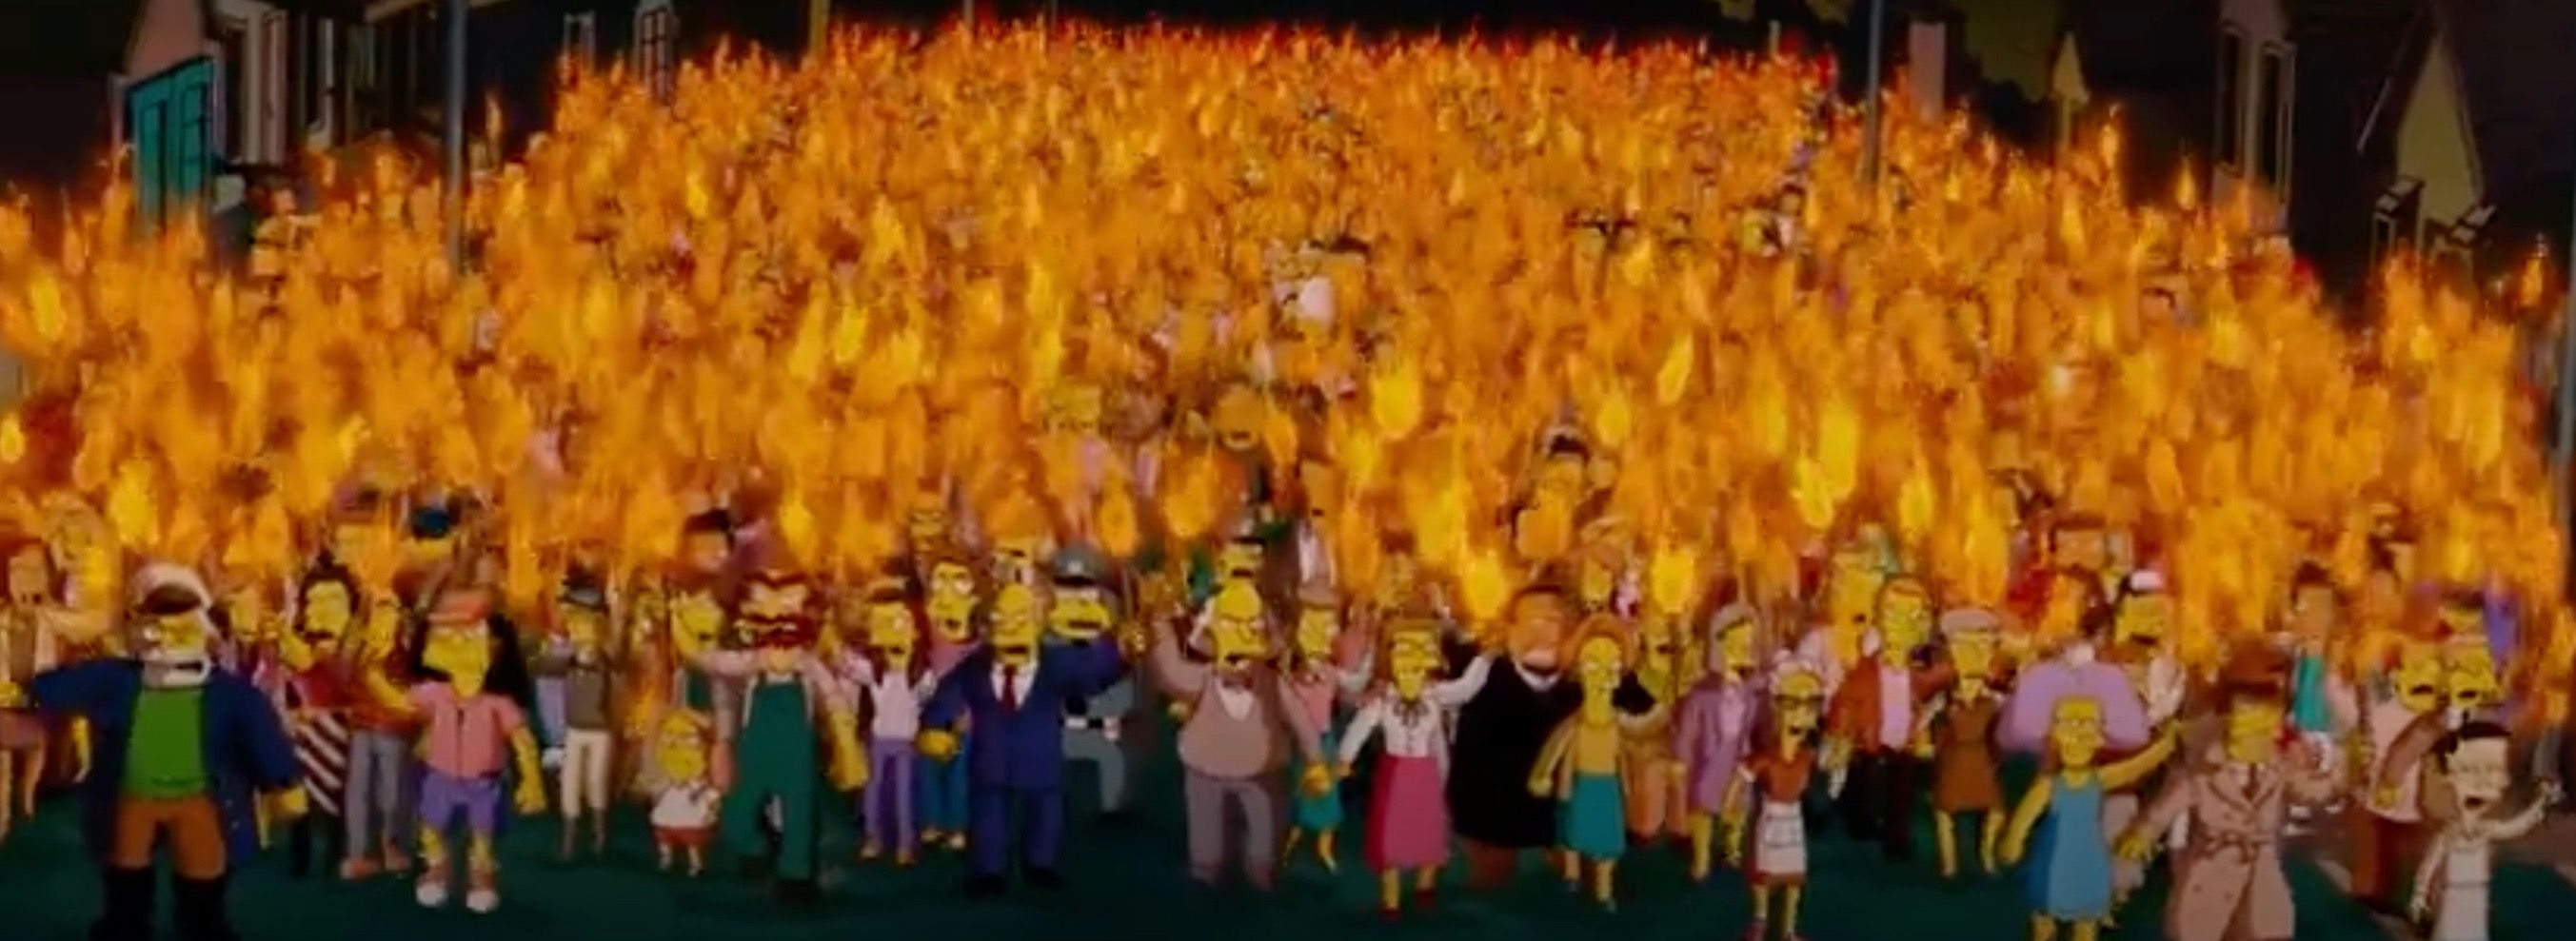 All of The Simpsons characters in an angry mob in The Simpsons Movie.